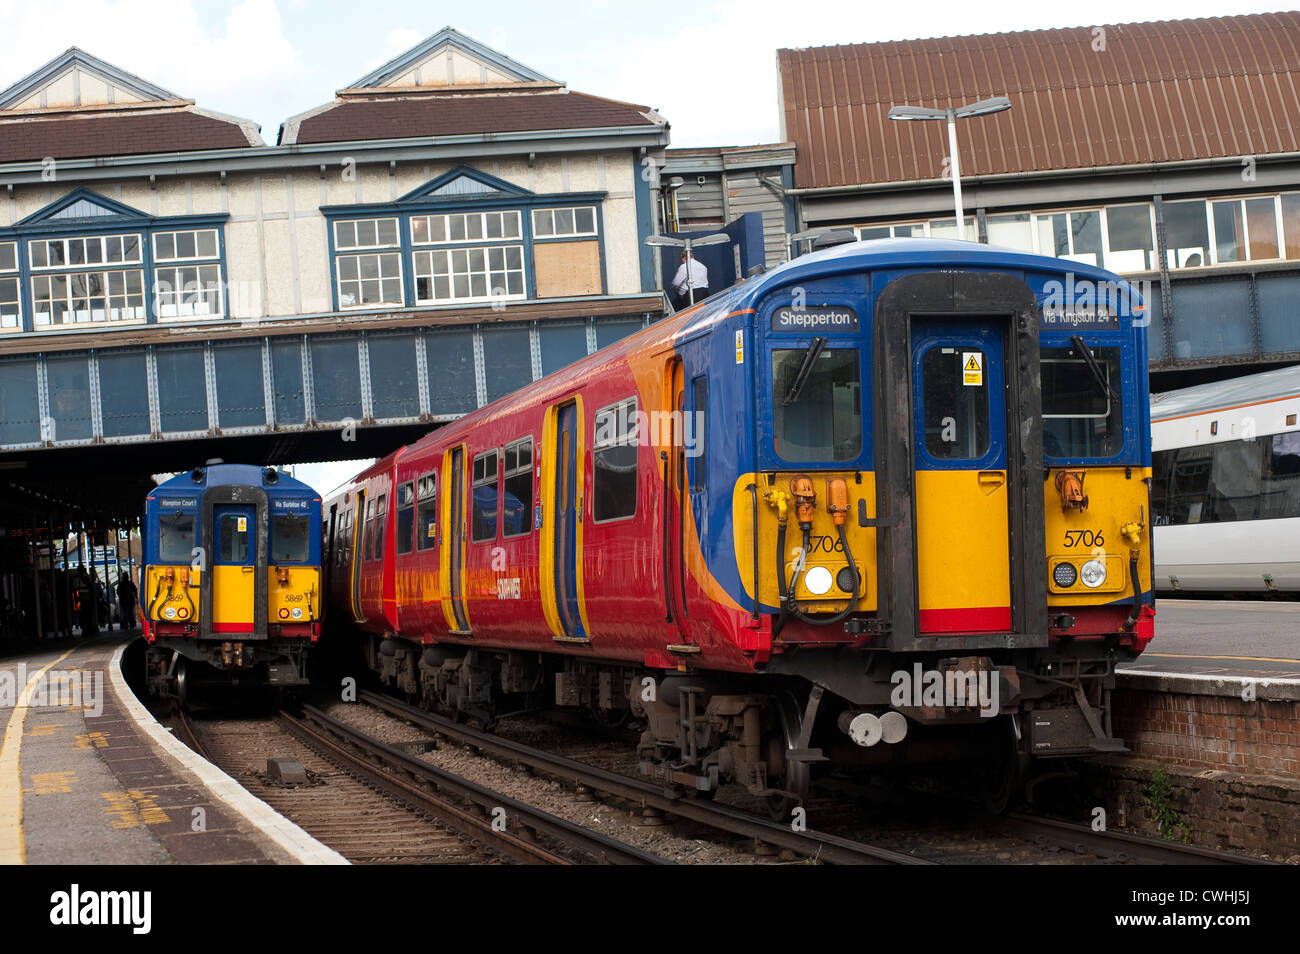 Class 455 passenger trains in South West Trains livery at Clapham Junction station, England. Stock Photo